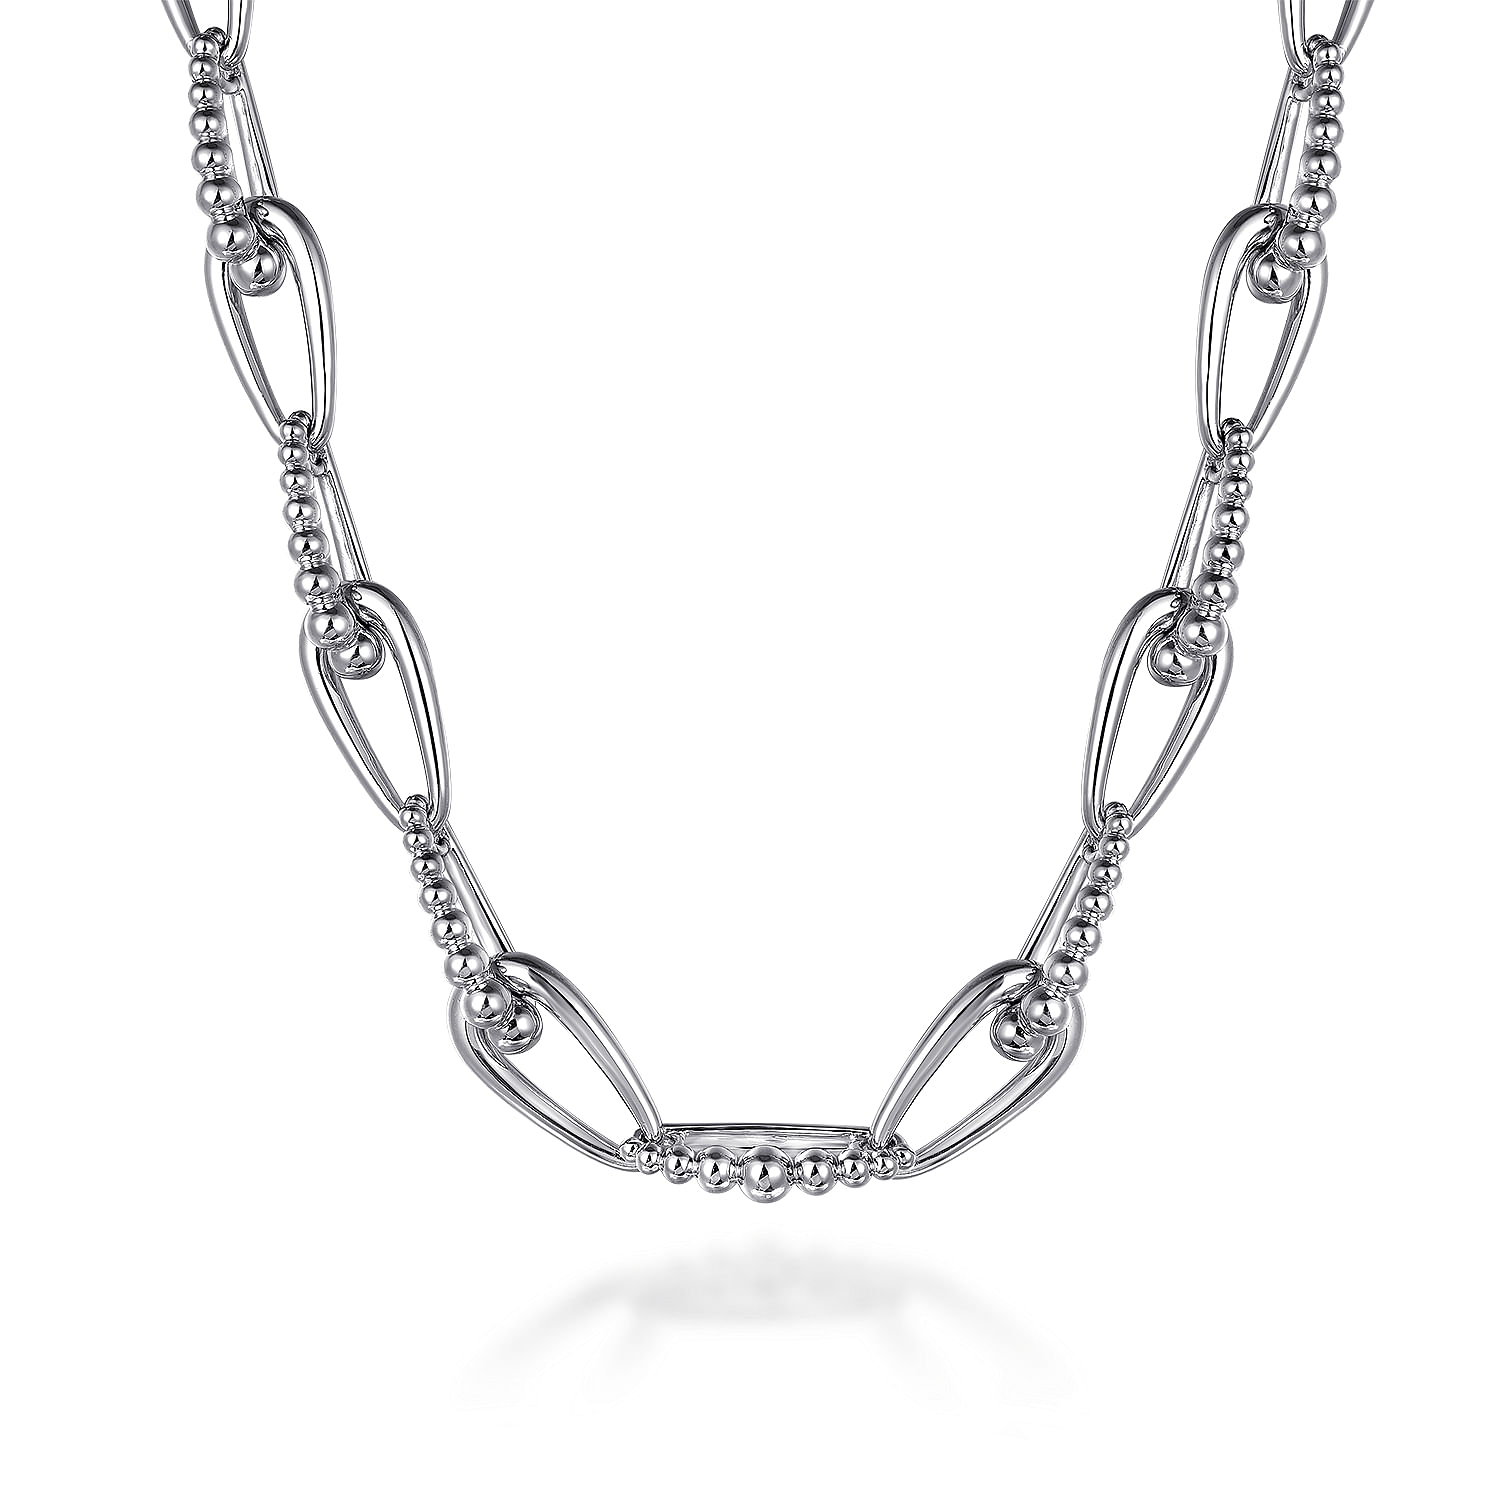 Gabriel - 925 Sterling Silver Oval Link Chain Necklace with Bujukan Connectors